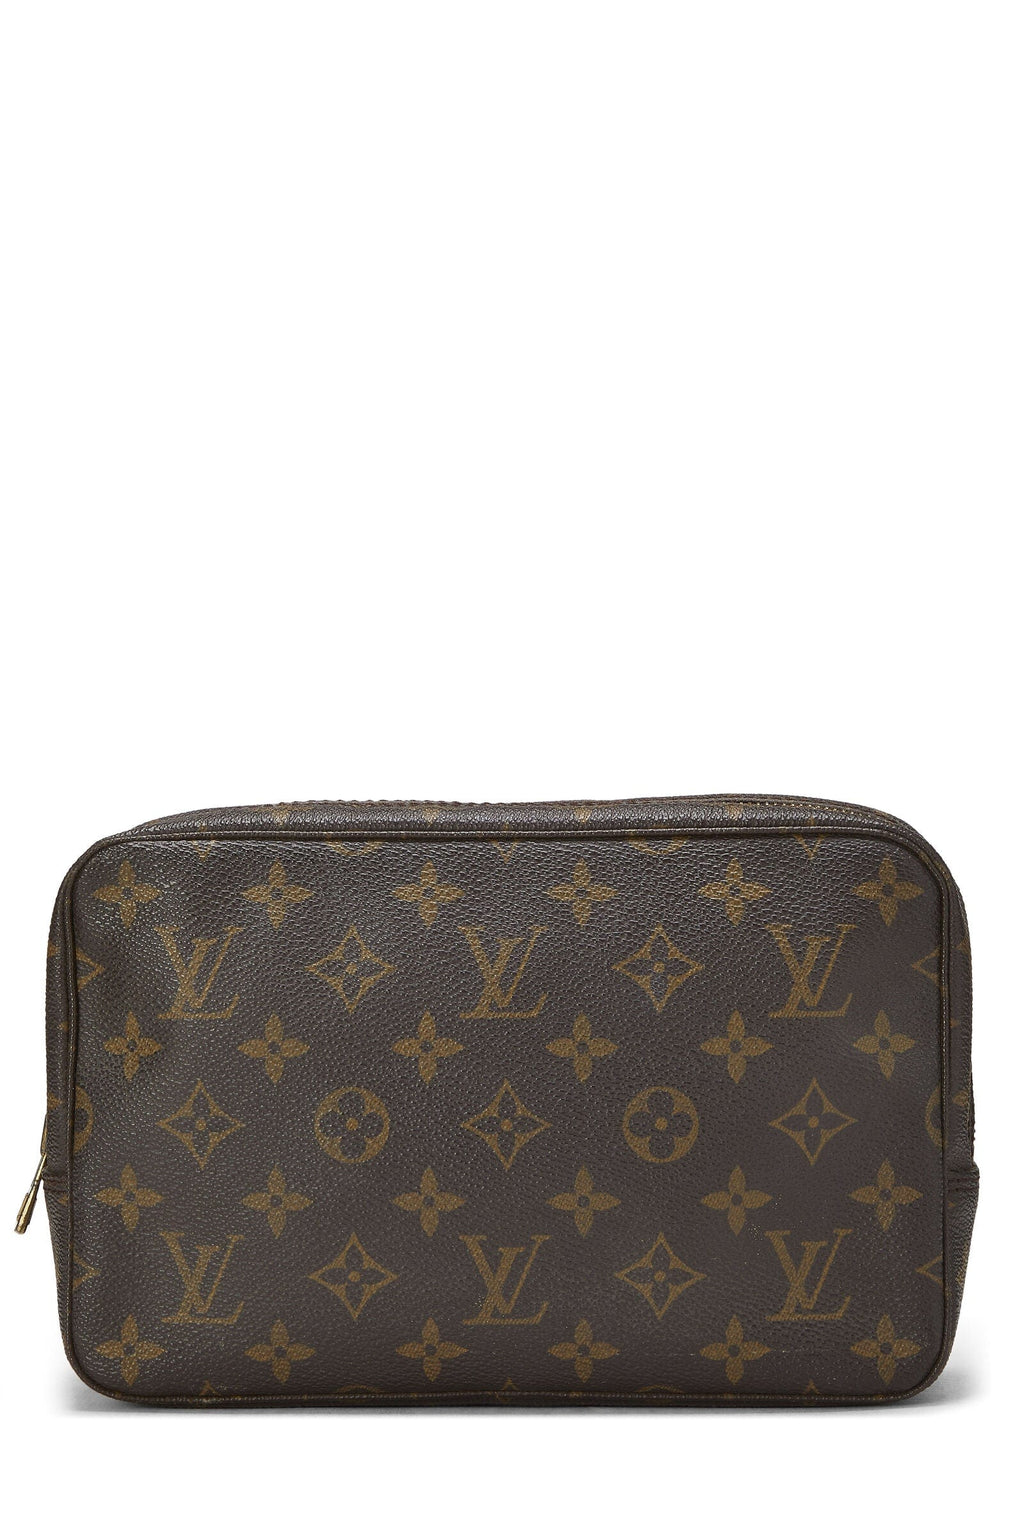 Black is the New Brown in Louis Vuitton's Monogram Eclipse Collection